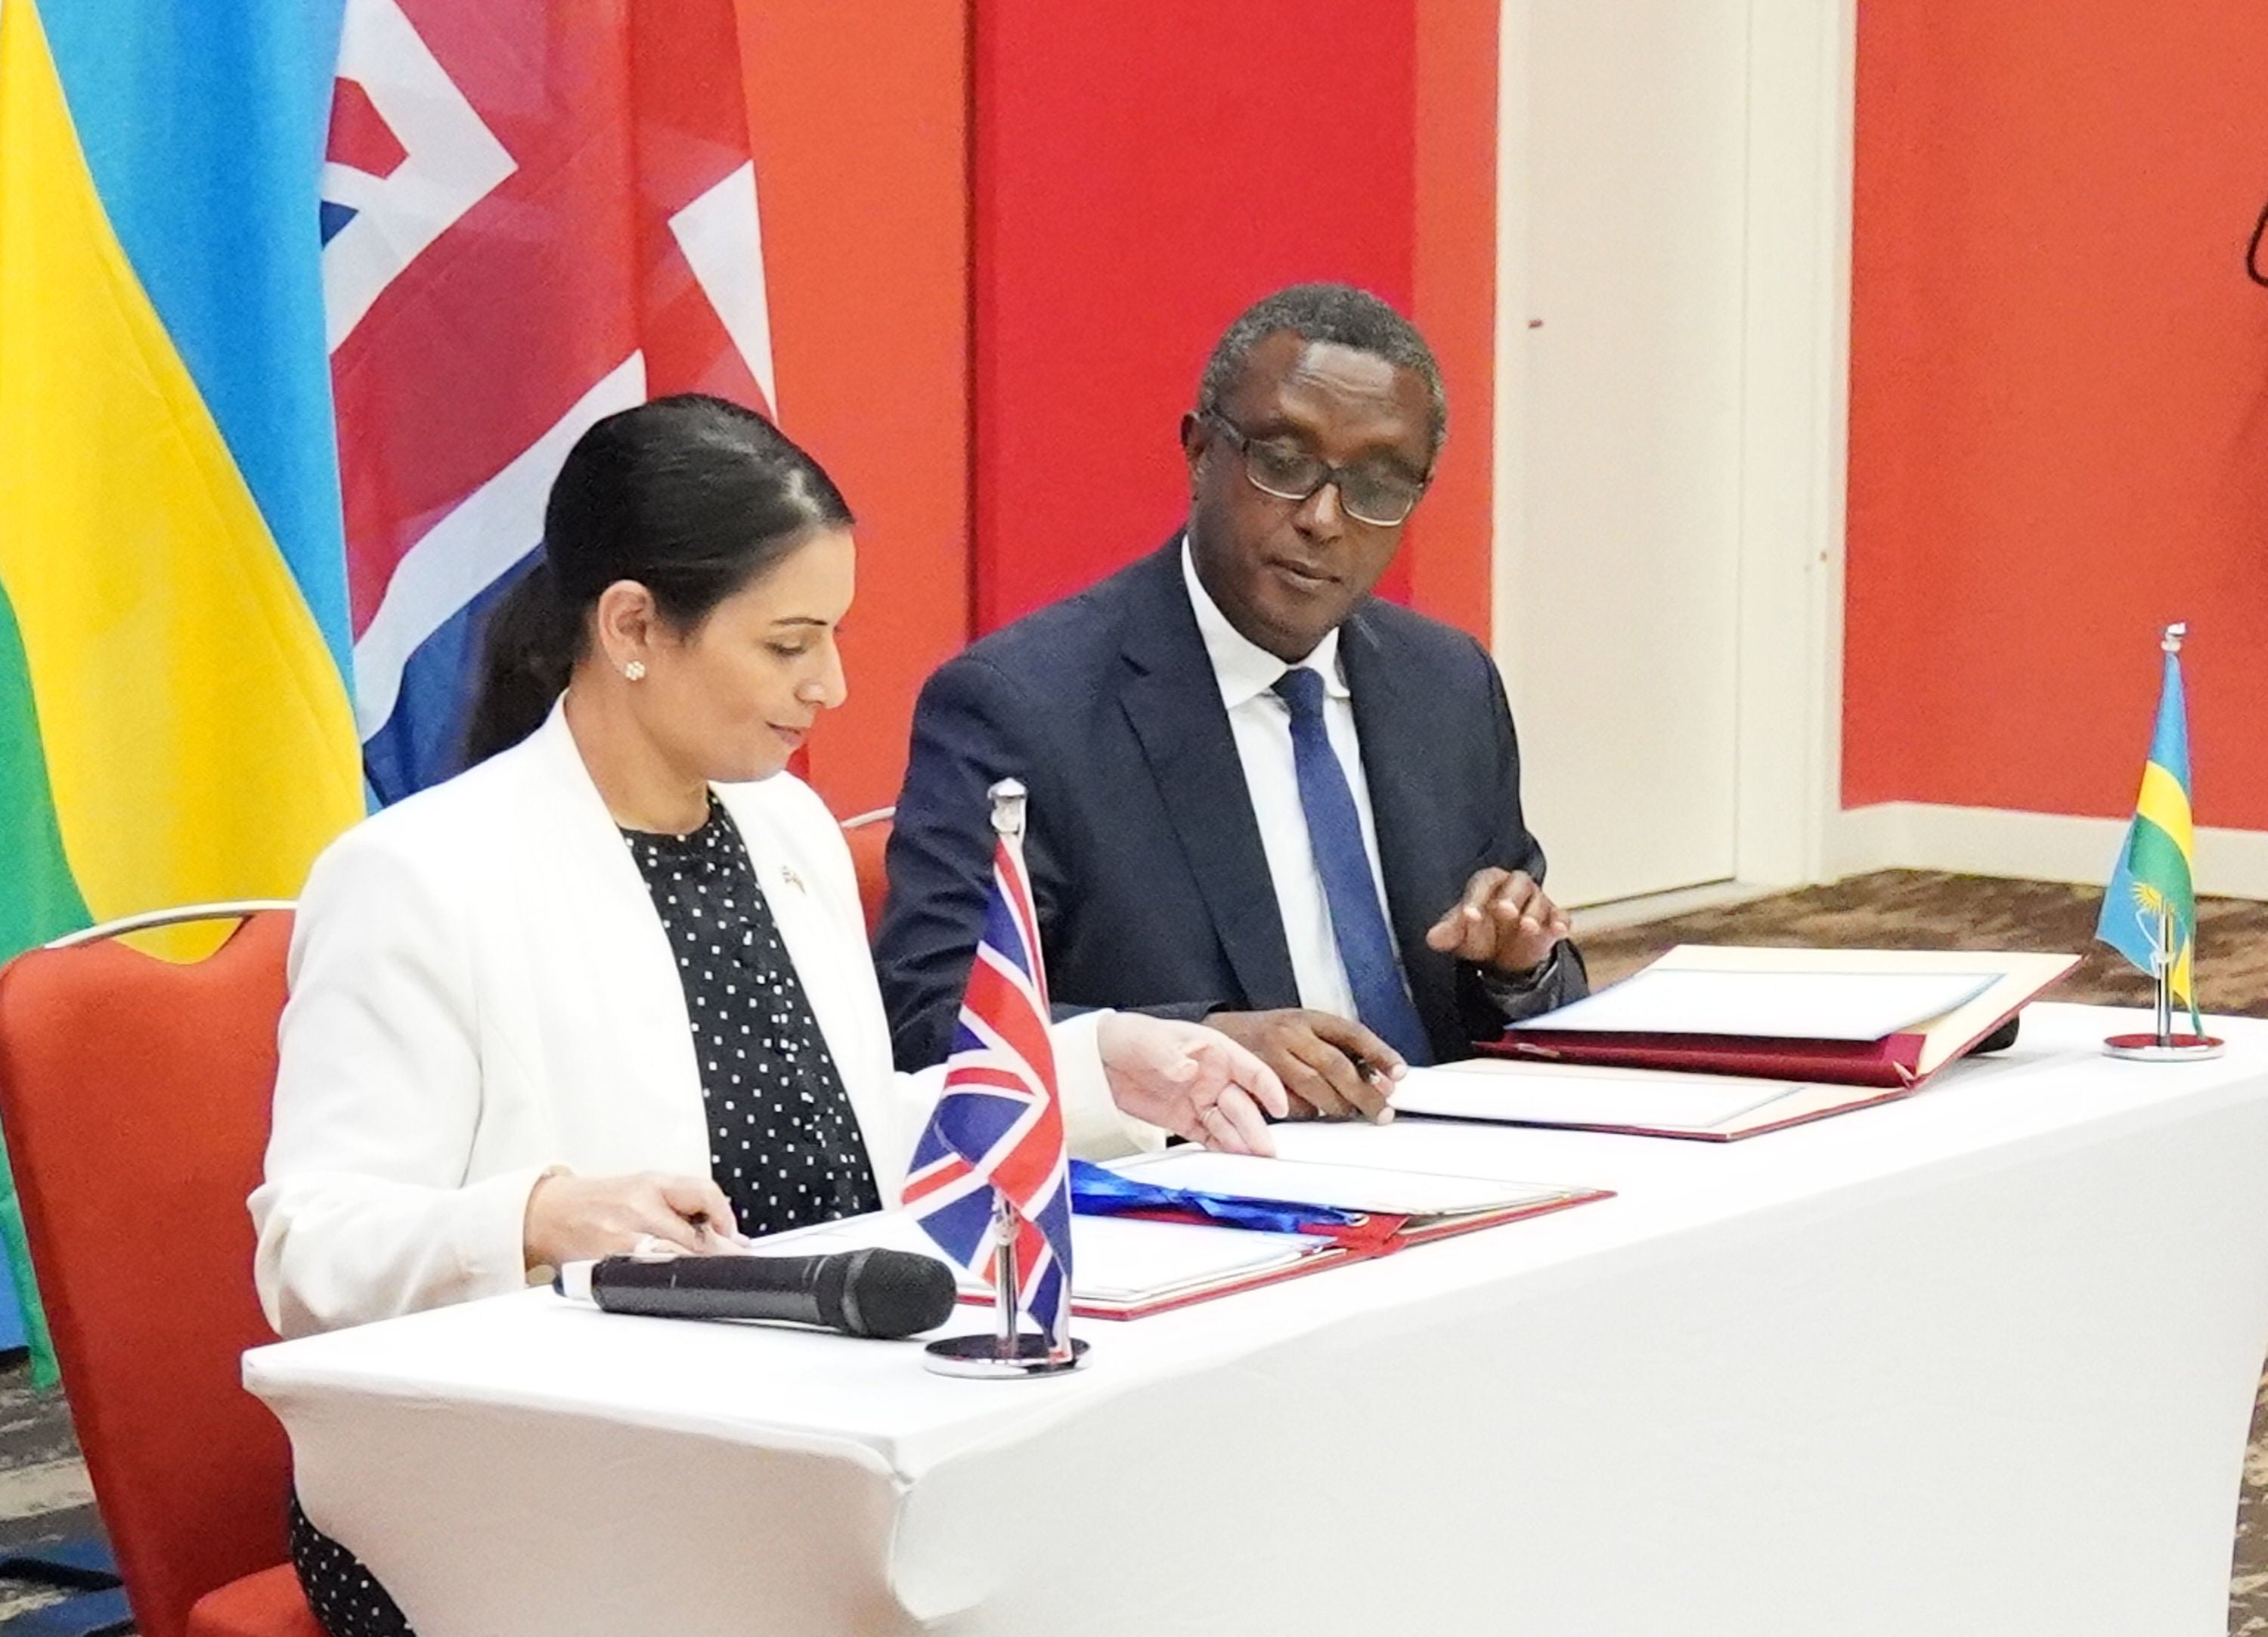 Home Secretary Priti Patel and Rwandan minister for foreign affairs and international co-operation, Vincent Biruta, signed a ‘world-first’ migration and economic development partnership in the East African nation’s capital city Kigali (Flora Thompson/PA)